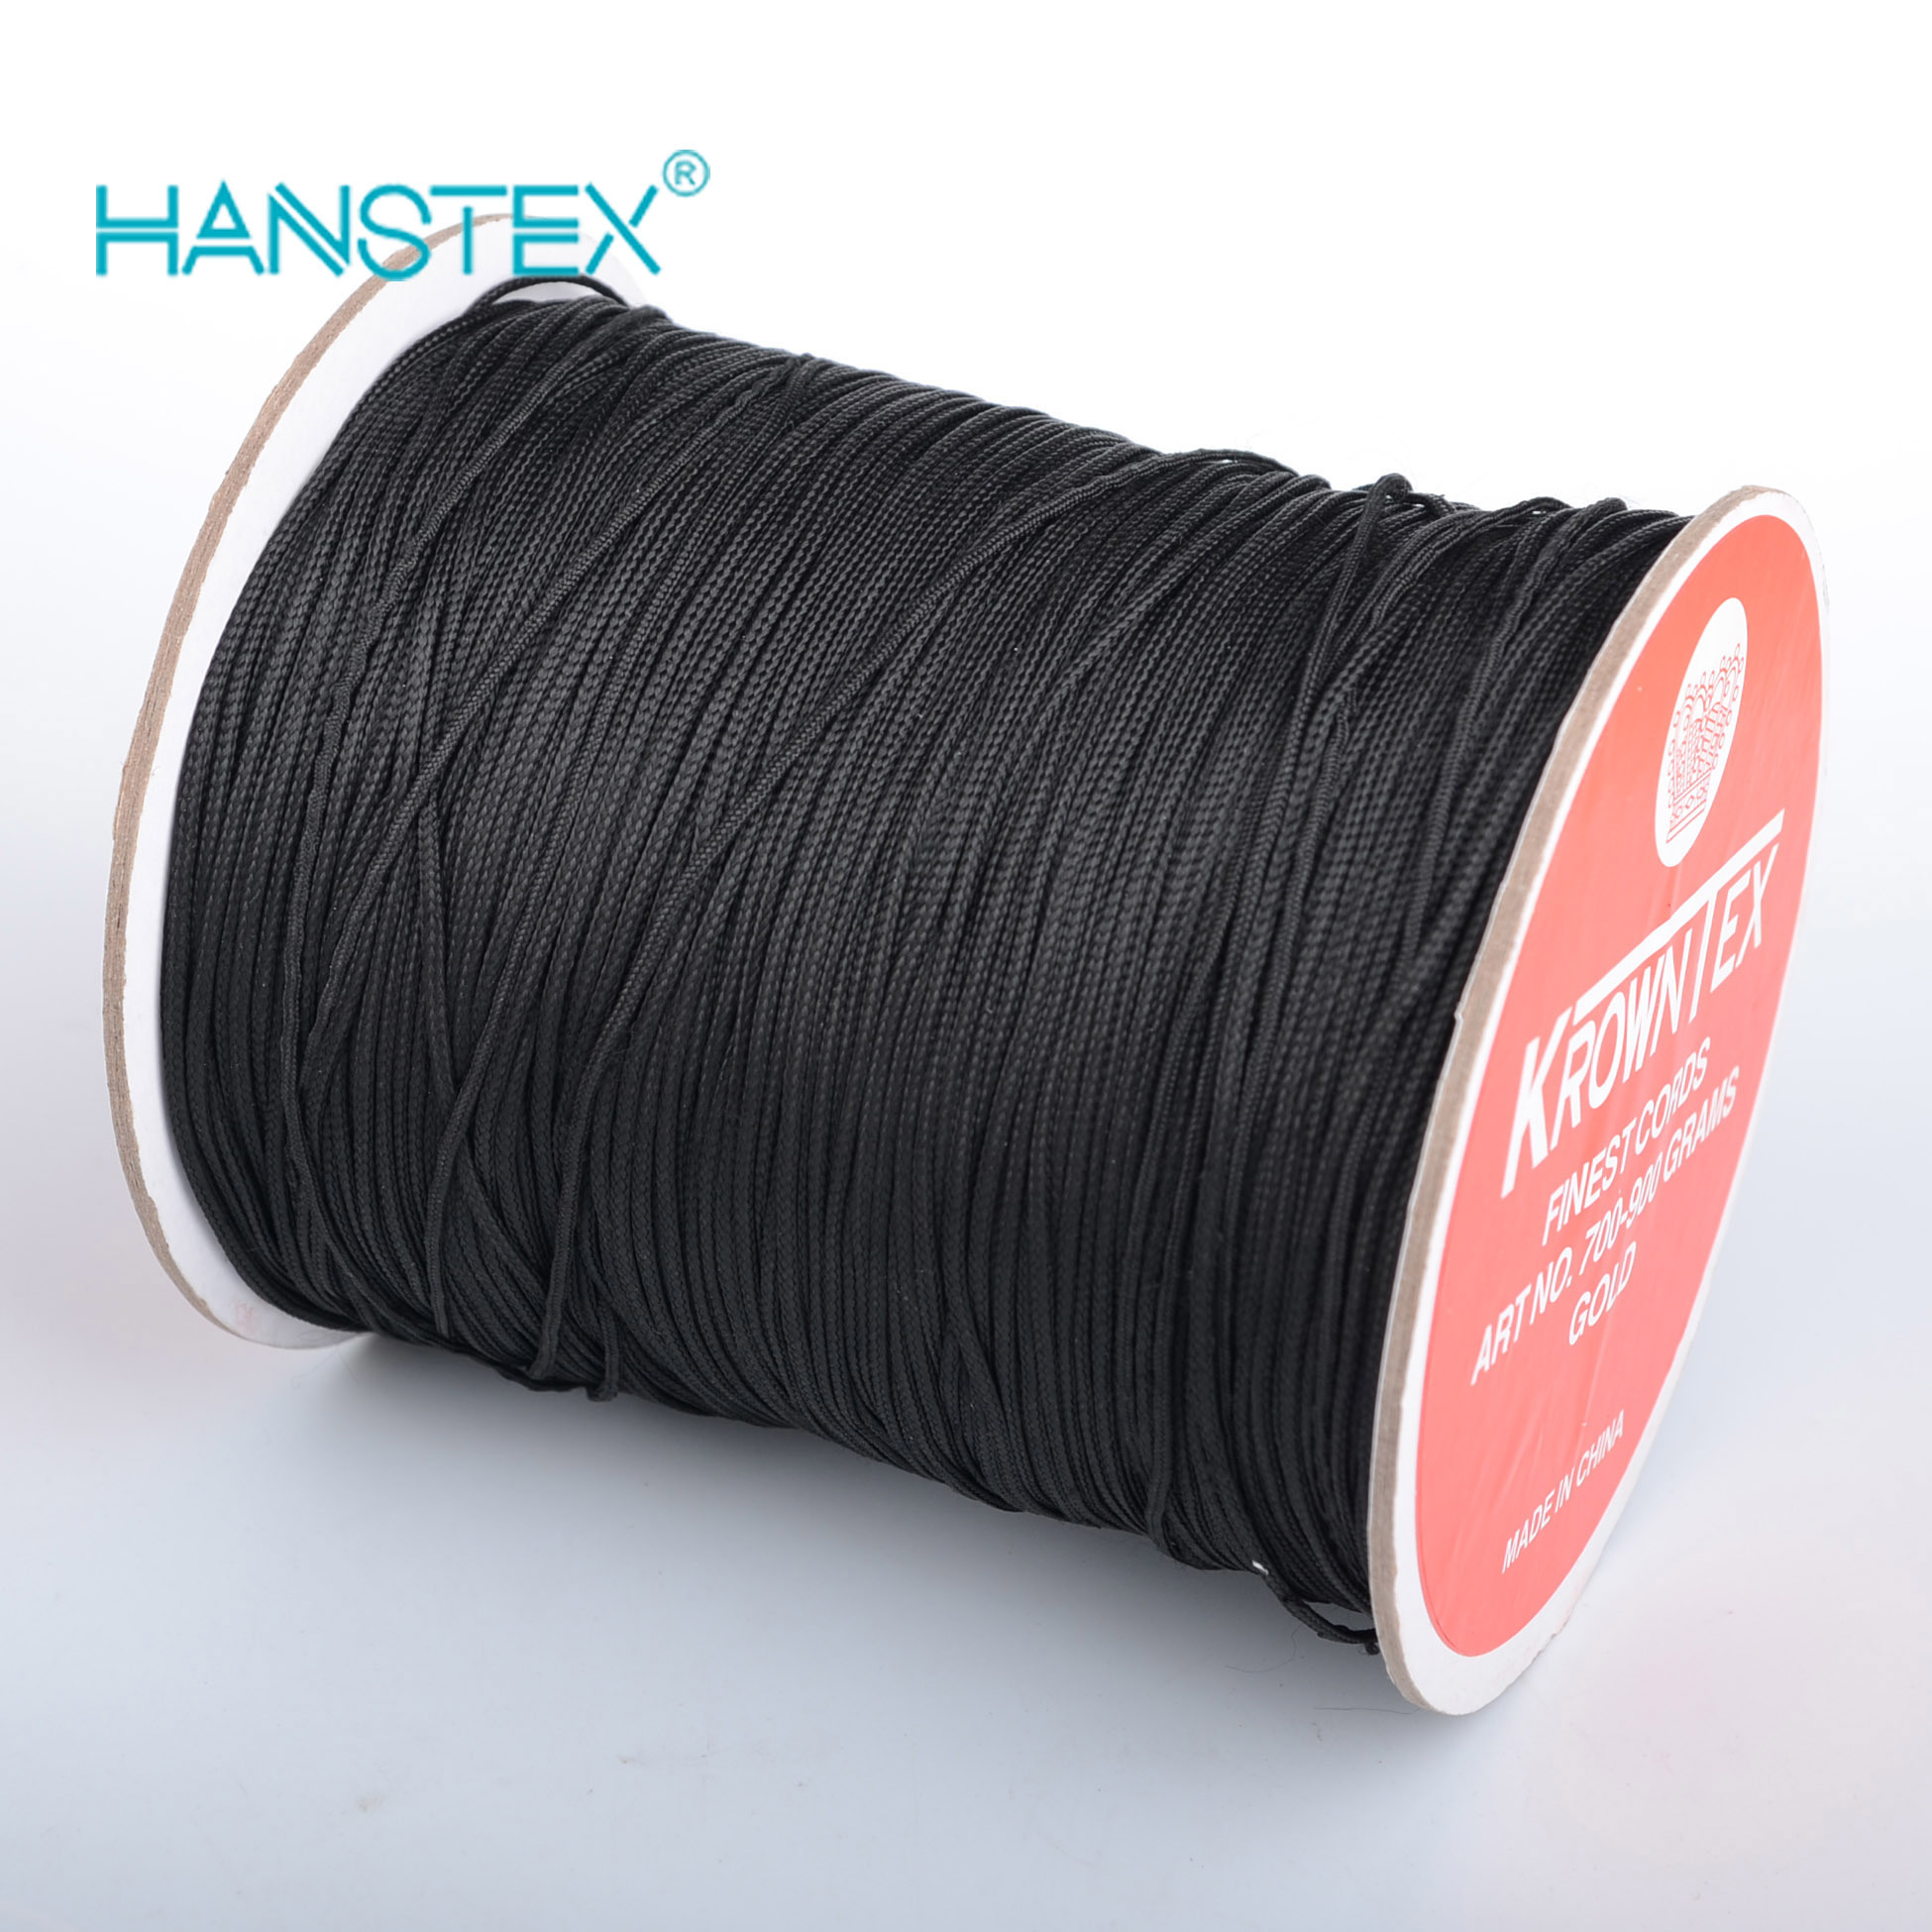 High Quality PP Twisted Rope (N-165)